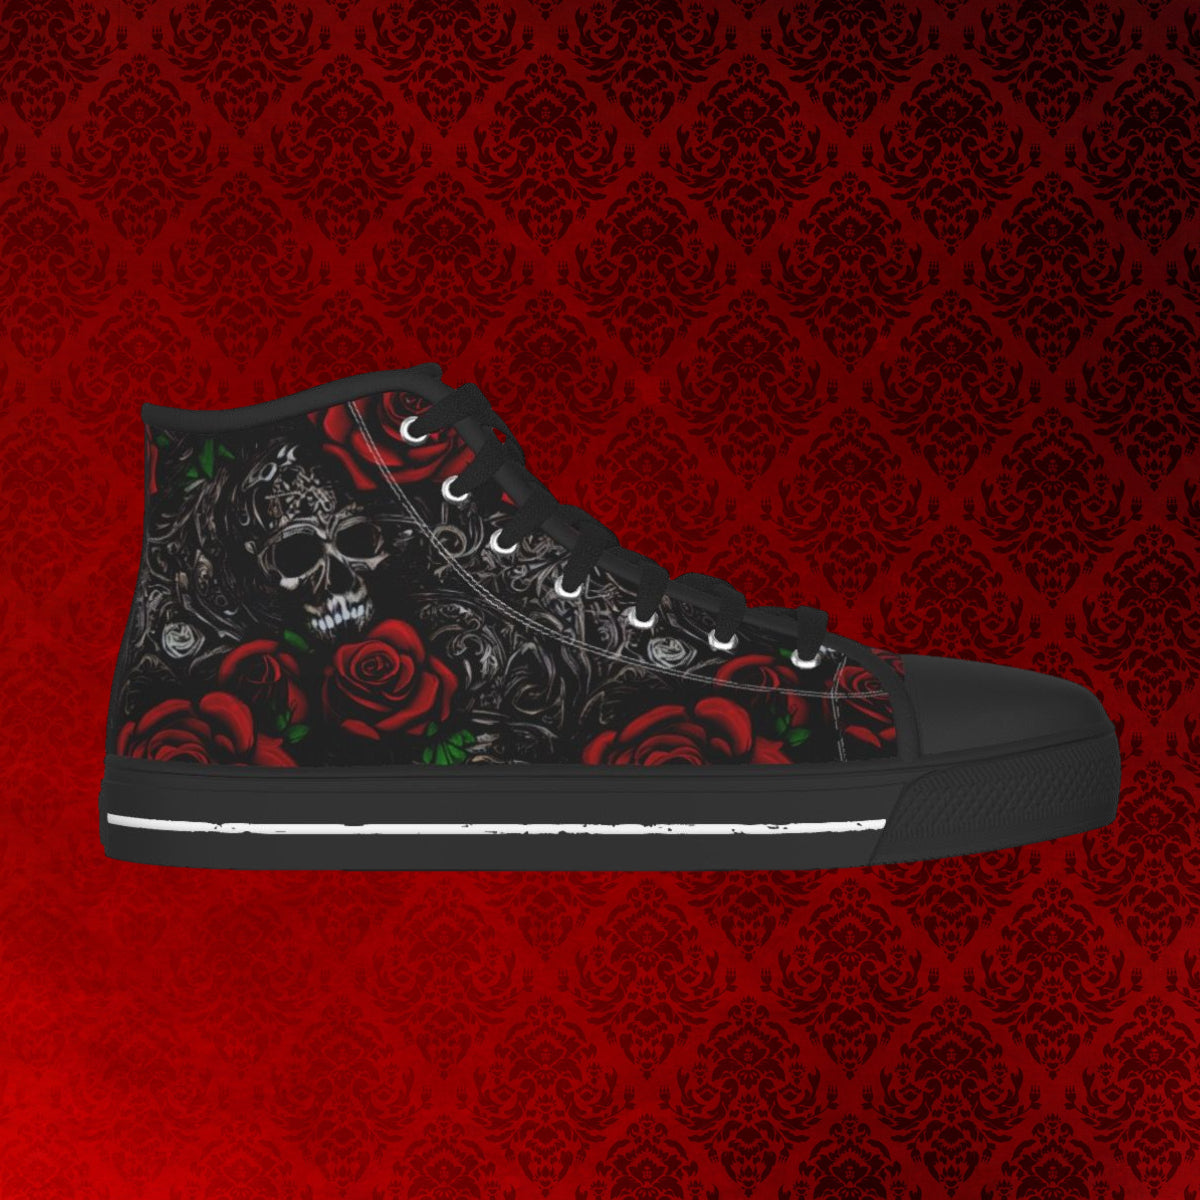 Women's Black and Red Gothic Floral Skull and Roses Pattern Converse Style Shoes